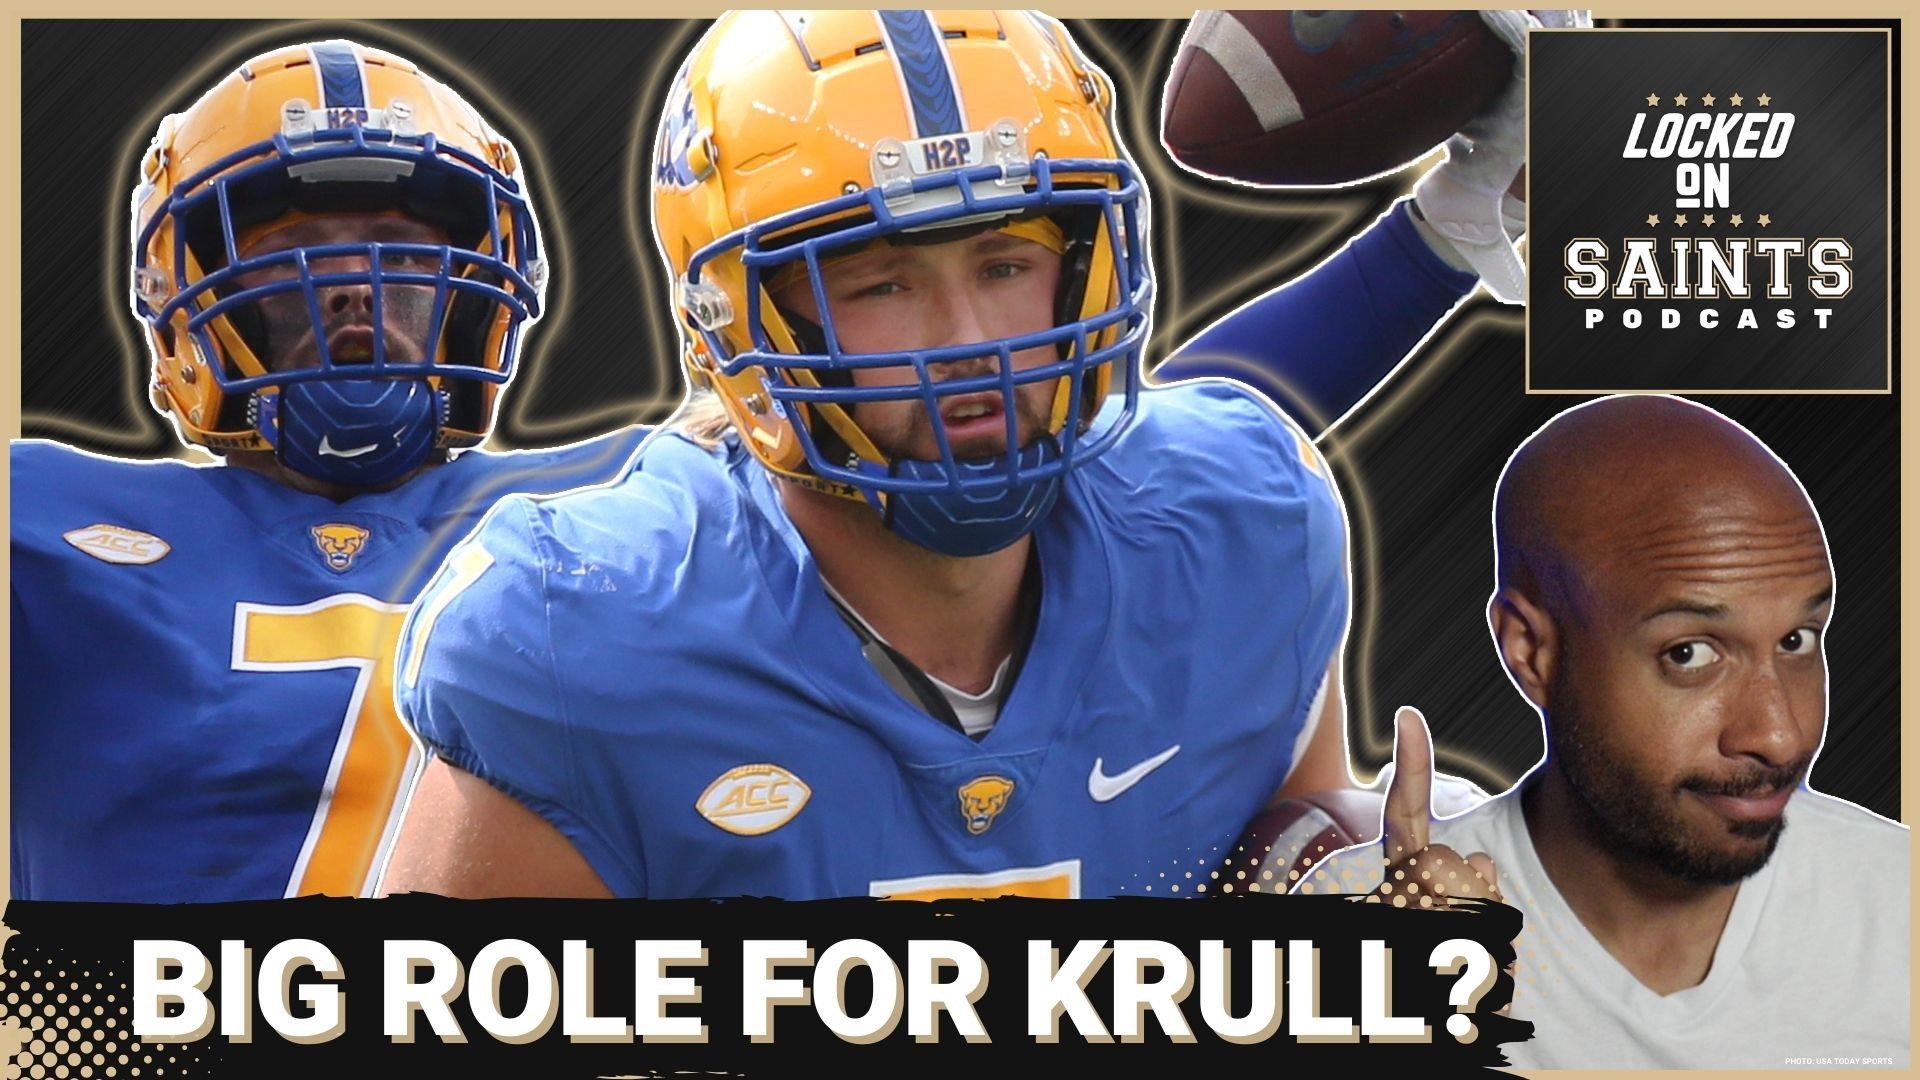 The New Orleans Saints have Juwan Johnson and have signed Foster Moreau, but could Lucas Krull be in for an even bigger role in 2023.